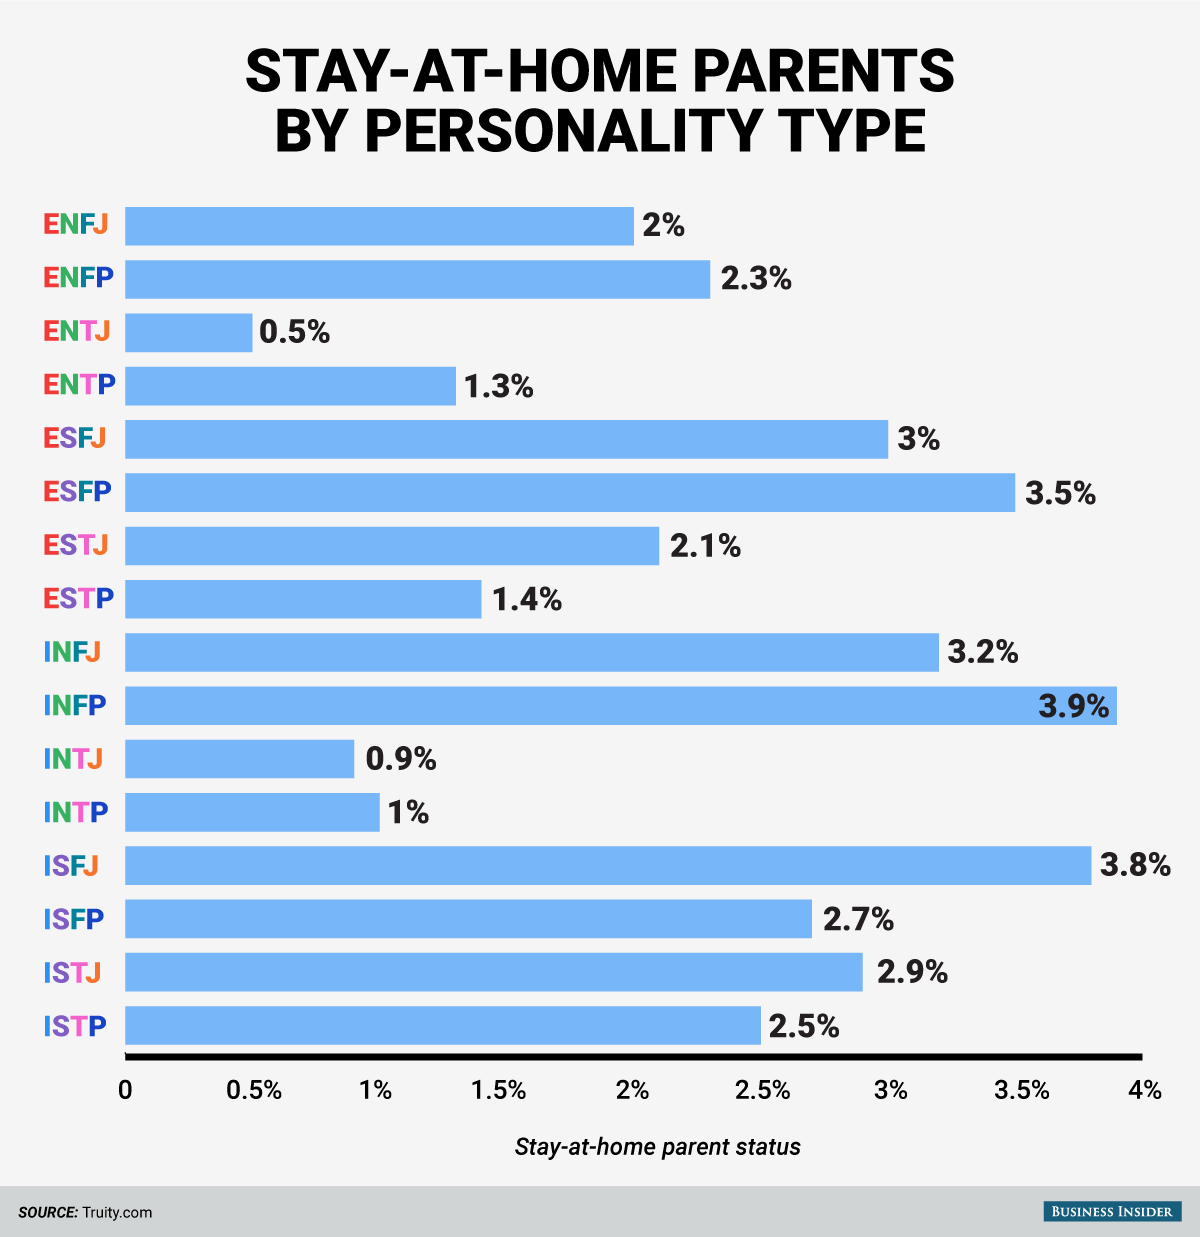 BI_Graphics_Personality types stay at home parents (1)